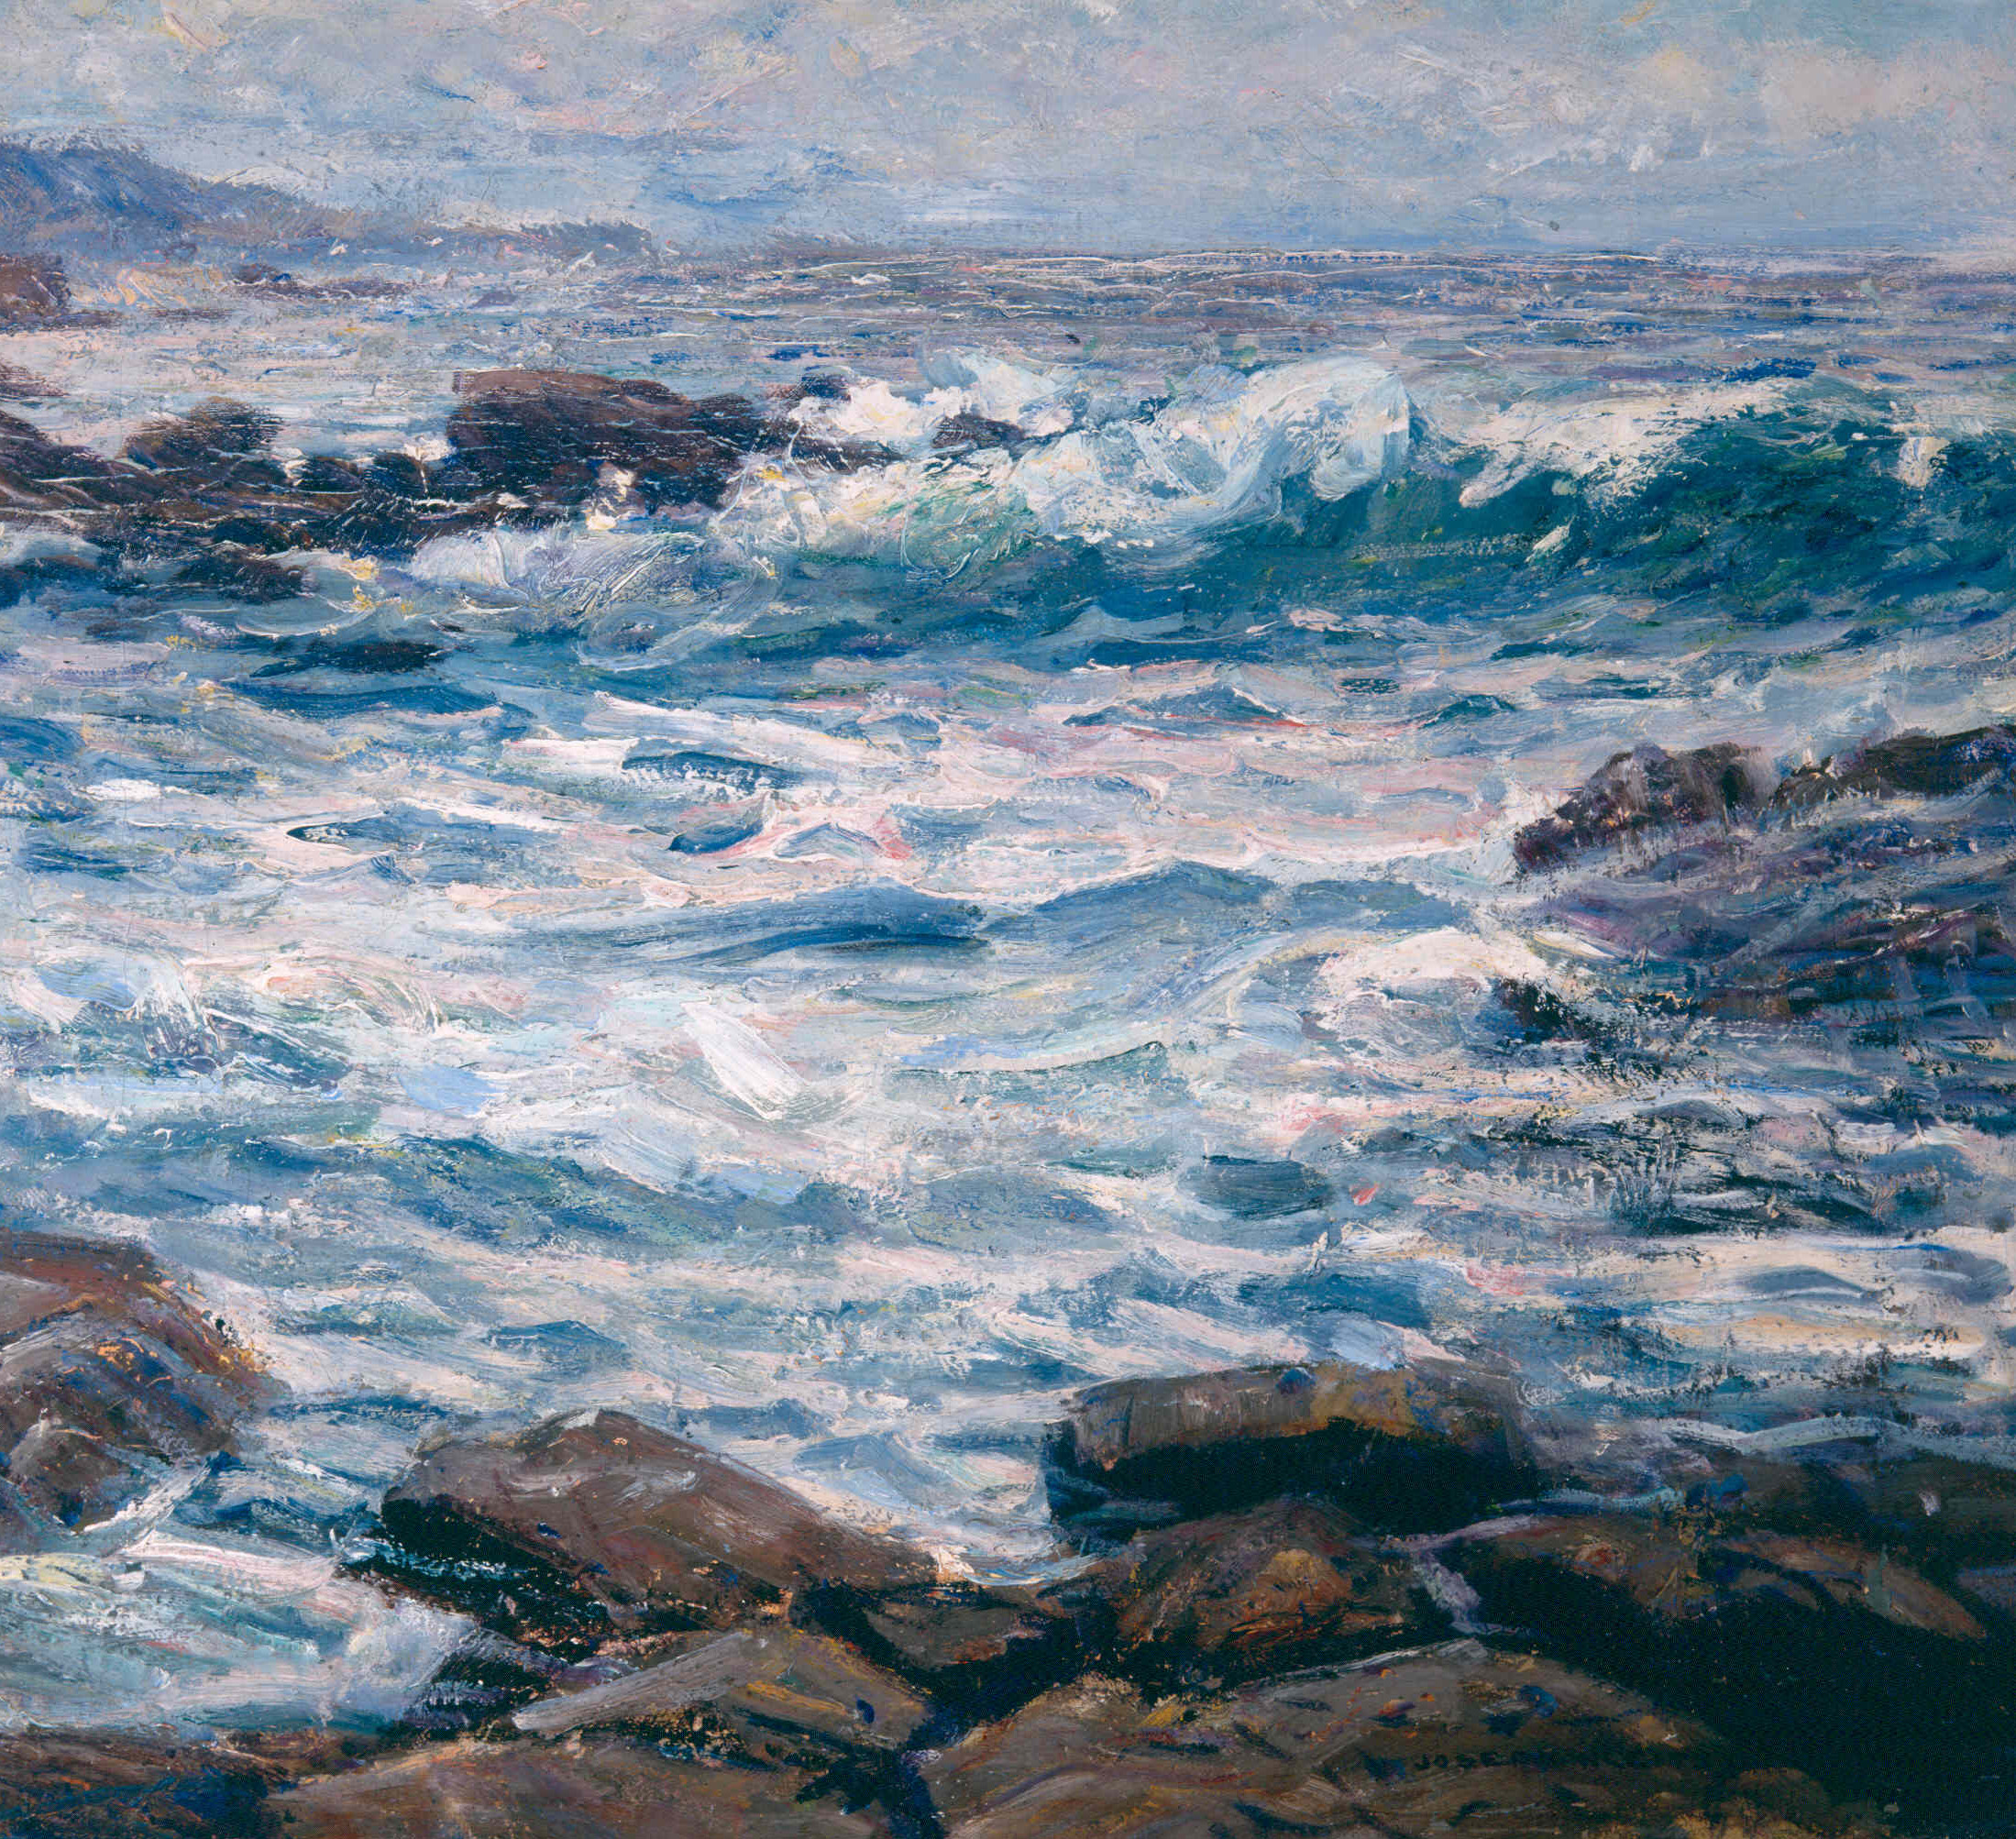    Laguna Wave  s / Oil on Canvas, 18" x 20" / Private Collection 